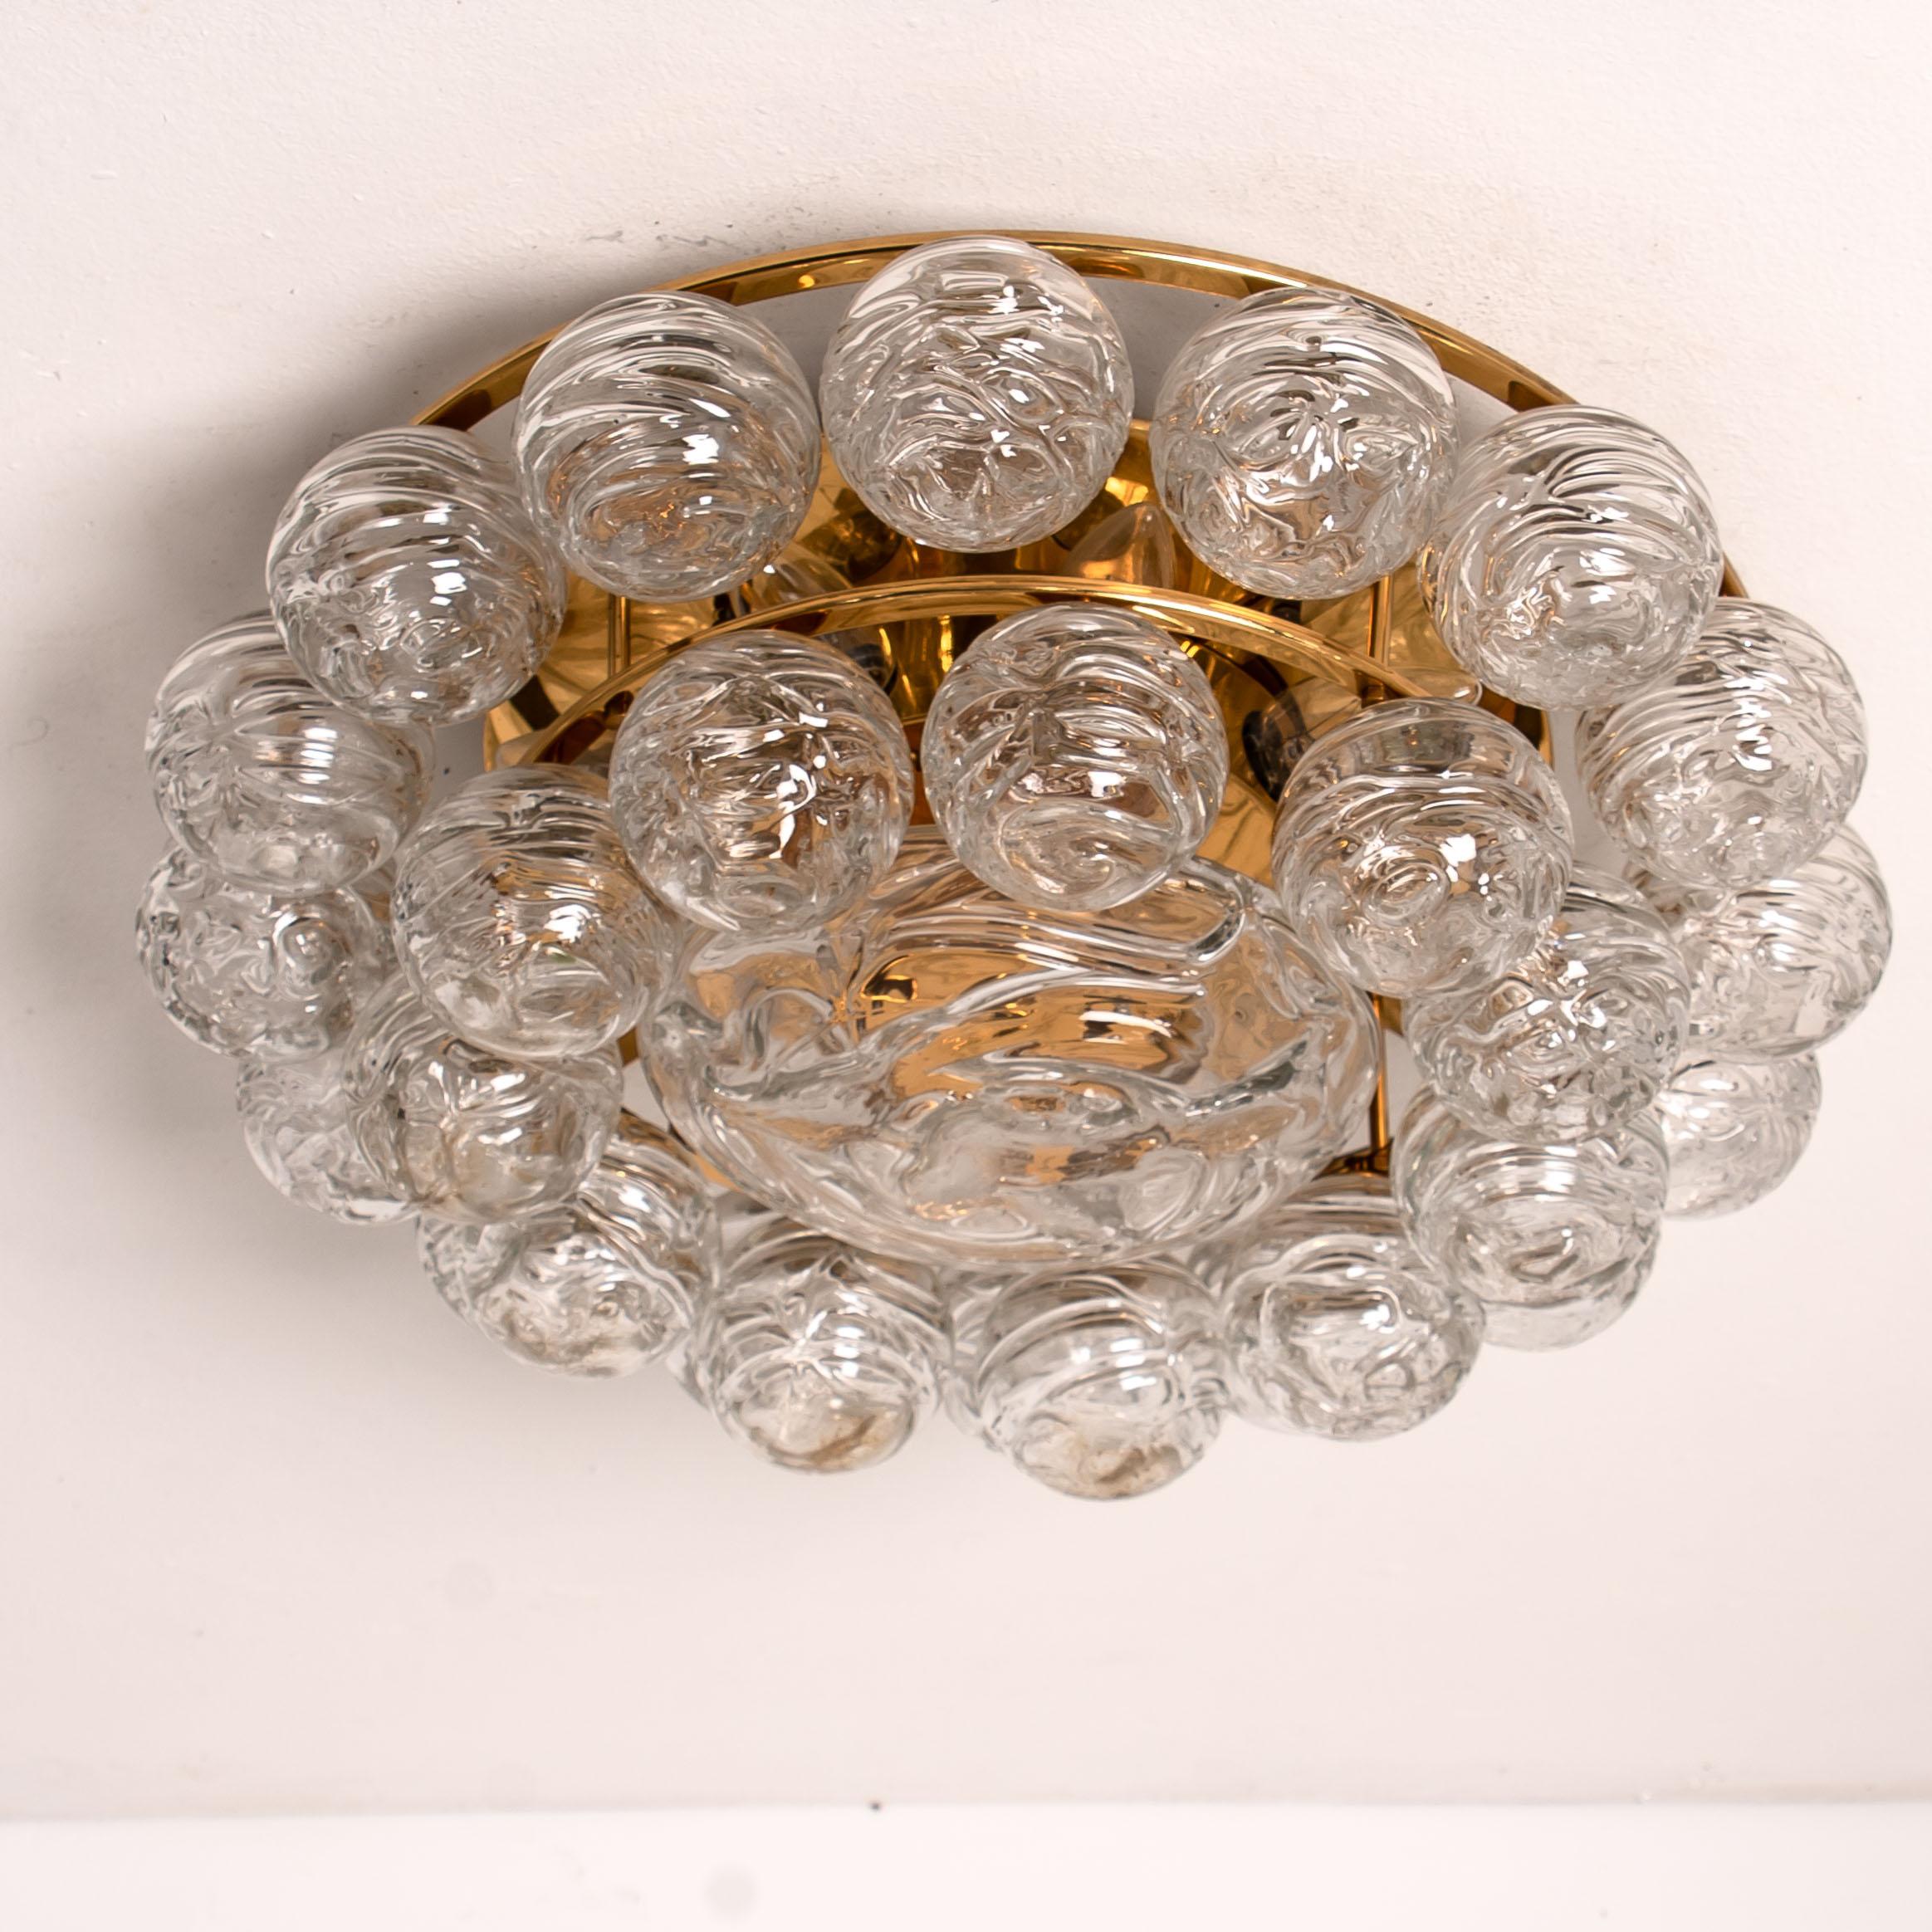 A flushmount light fixture by Doria Leuchten, Germany, manufactured in midcentury, circa 1960.
The lamp is made of a nickeled backplate and a brass frame which holds 27 hand blown glass balls and one glass disc in the centre. Illuminates